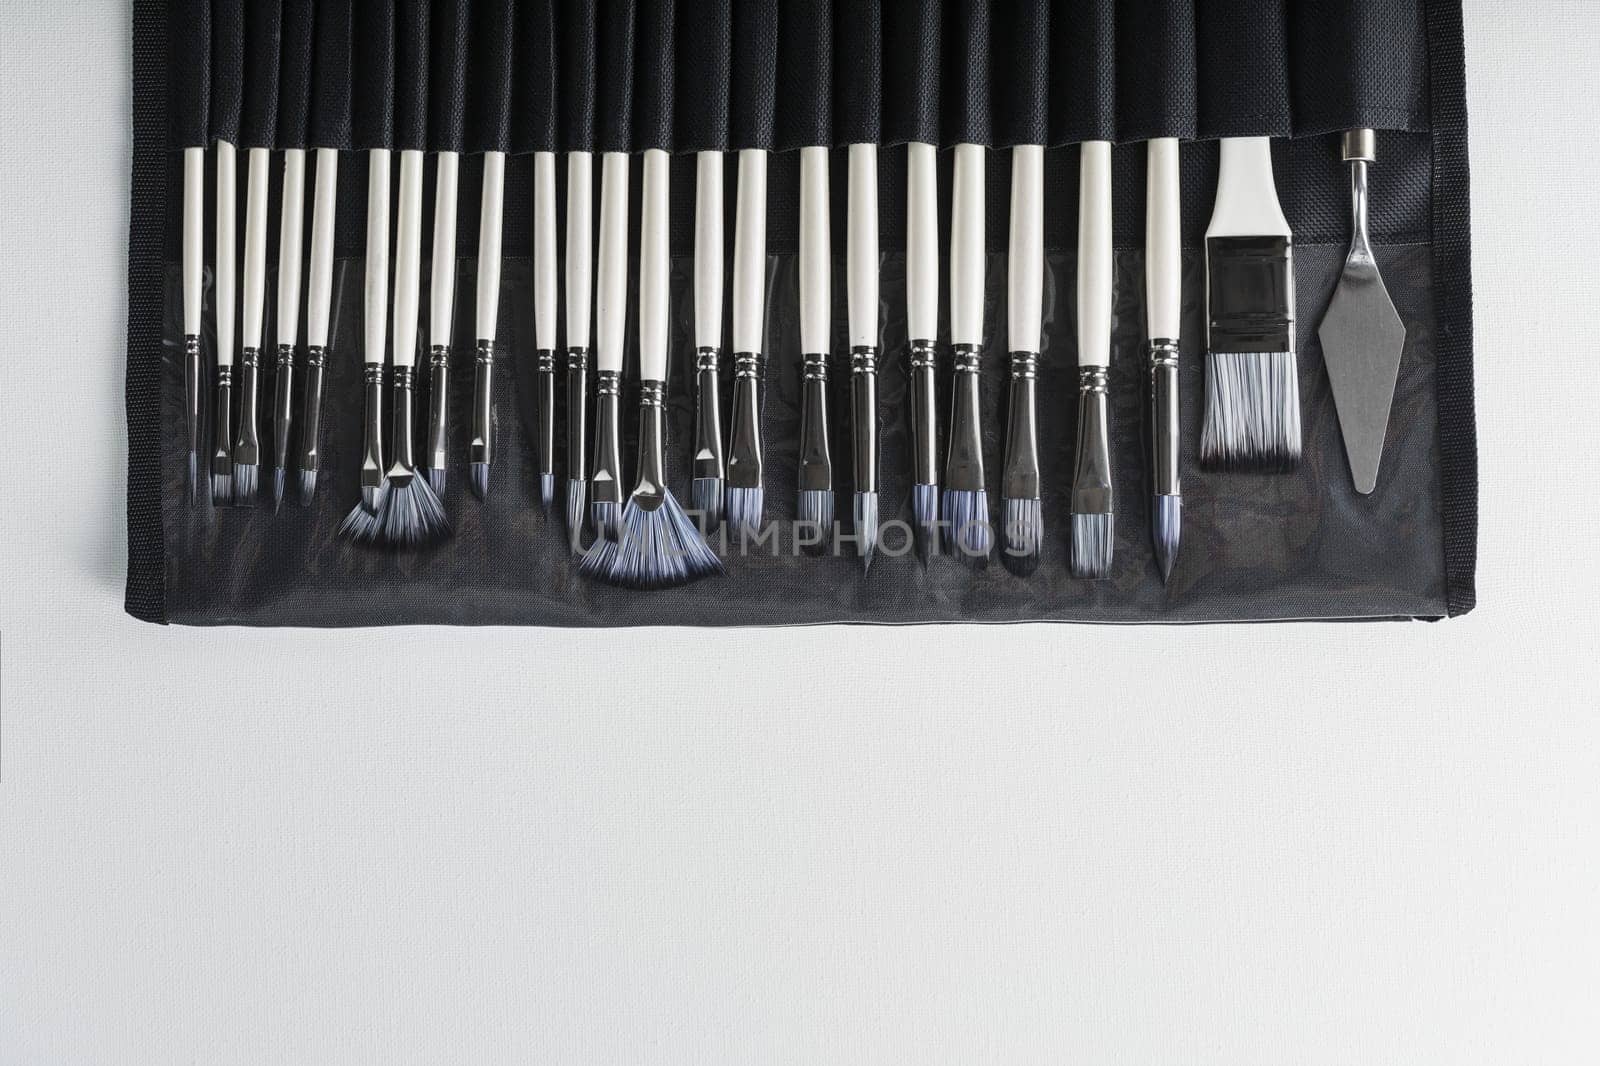 A set of art brushes for drawing on a white background by AlexGrec